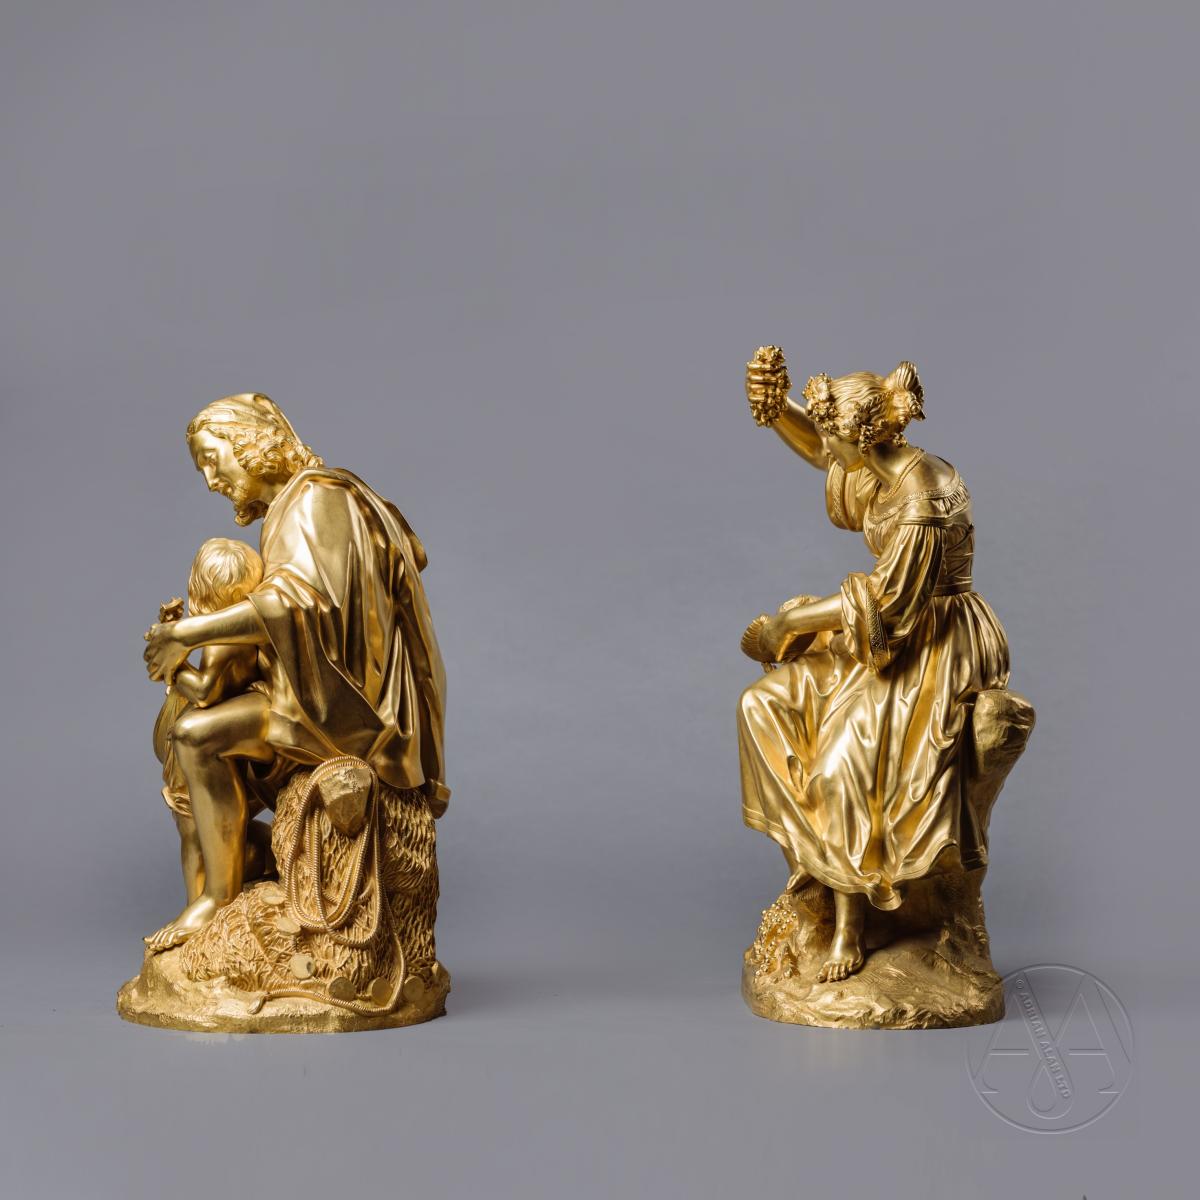 An Exceptional Pair of Restoration Period Gilt-Bronze Allegorical Groups Depicting Music and Wine